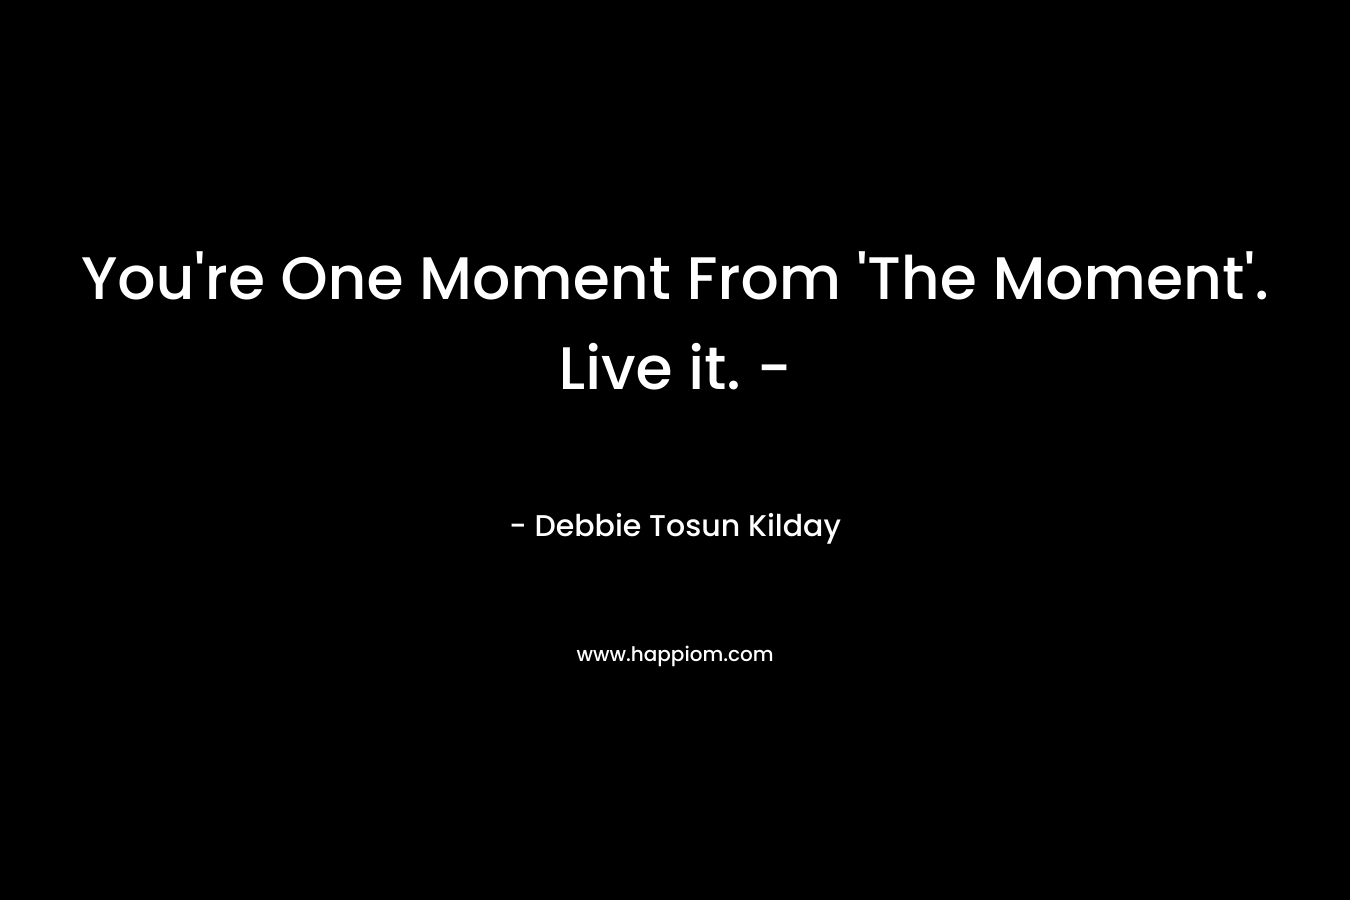 You’re One Moment From ‘The Moment’. Live it. – – Debbie Tosun Kilday